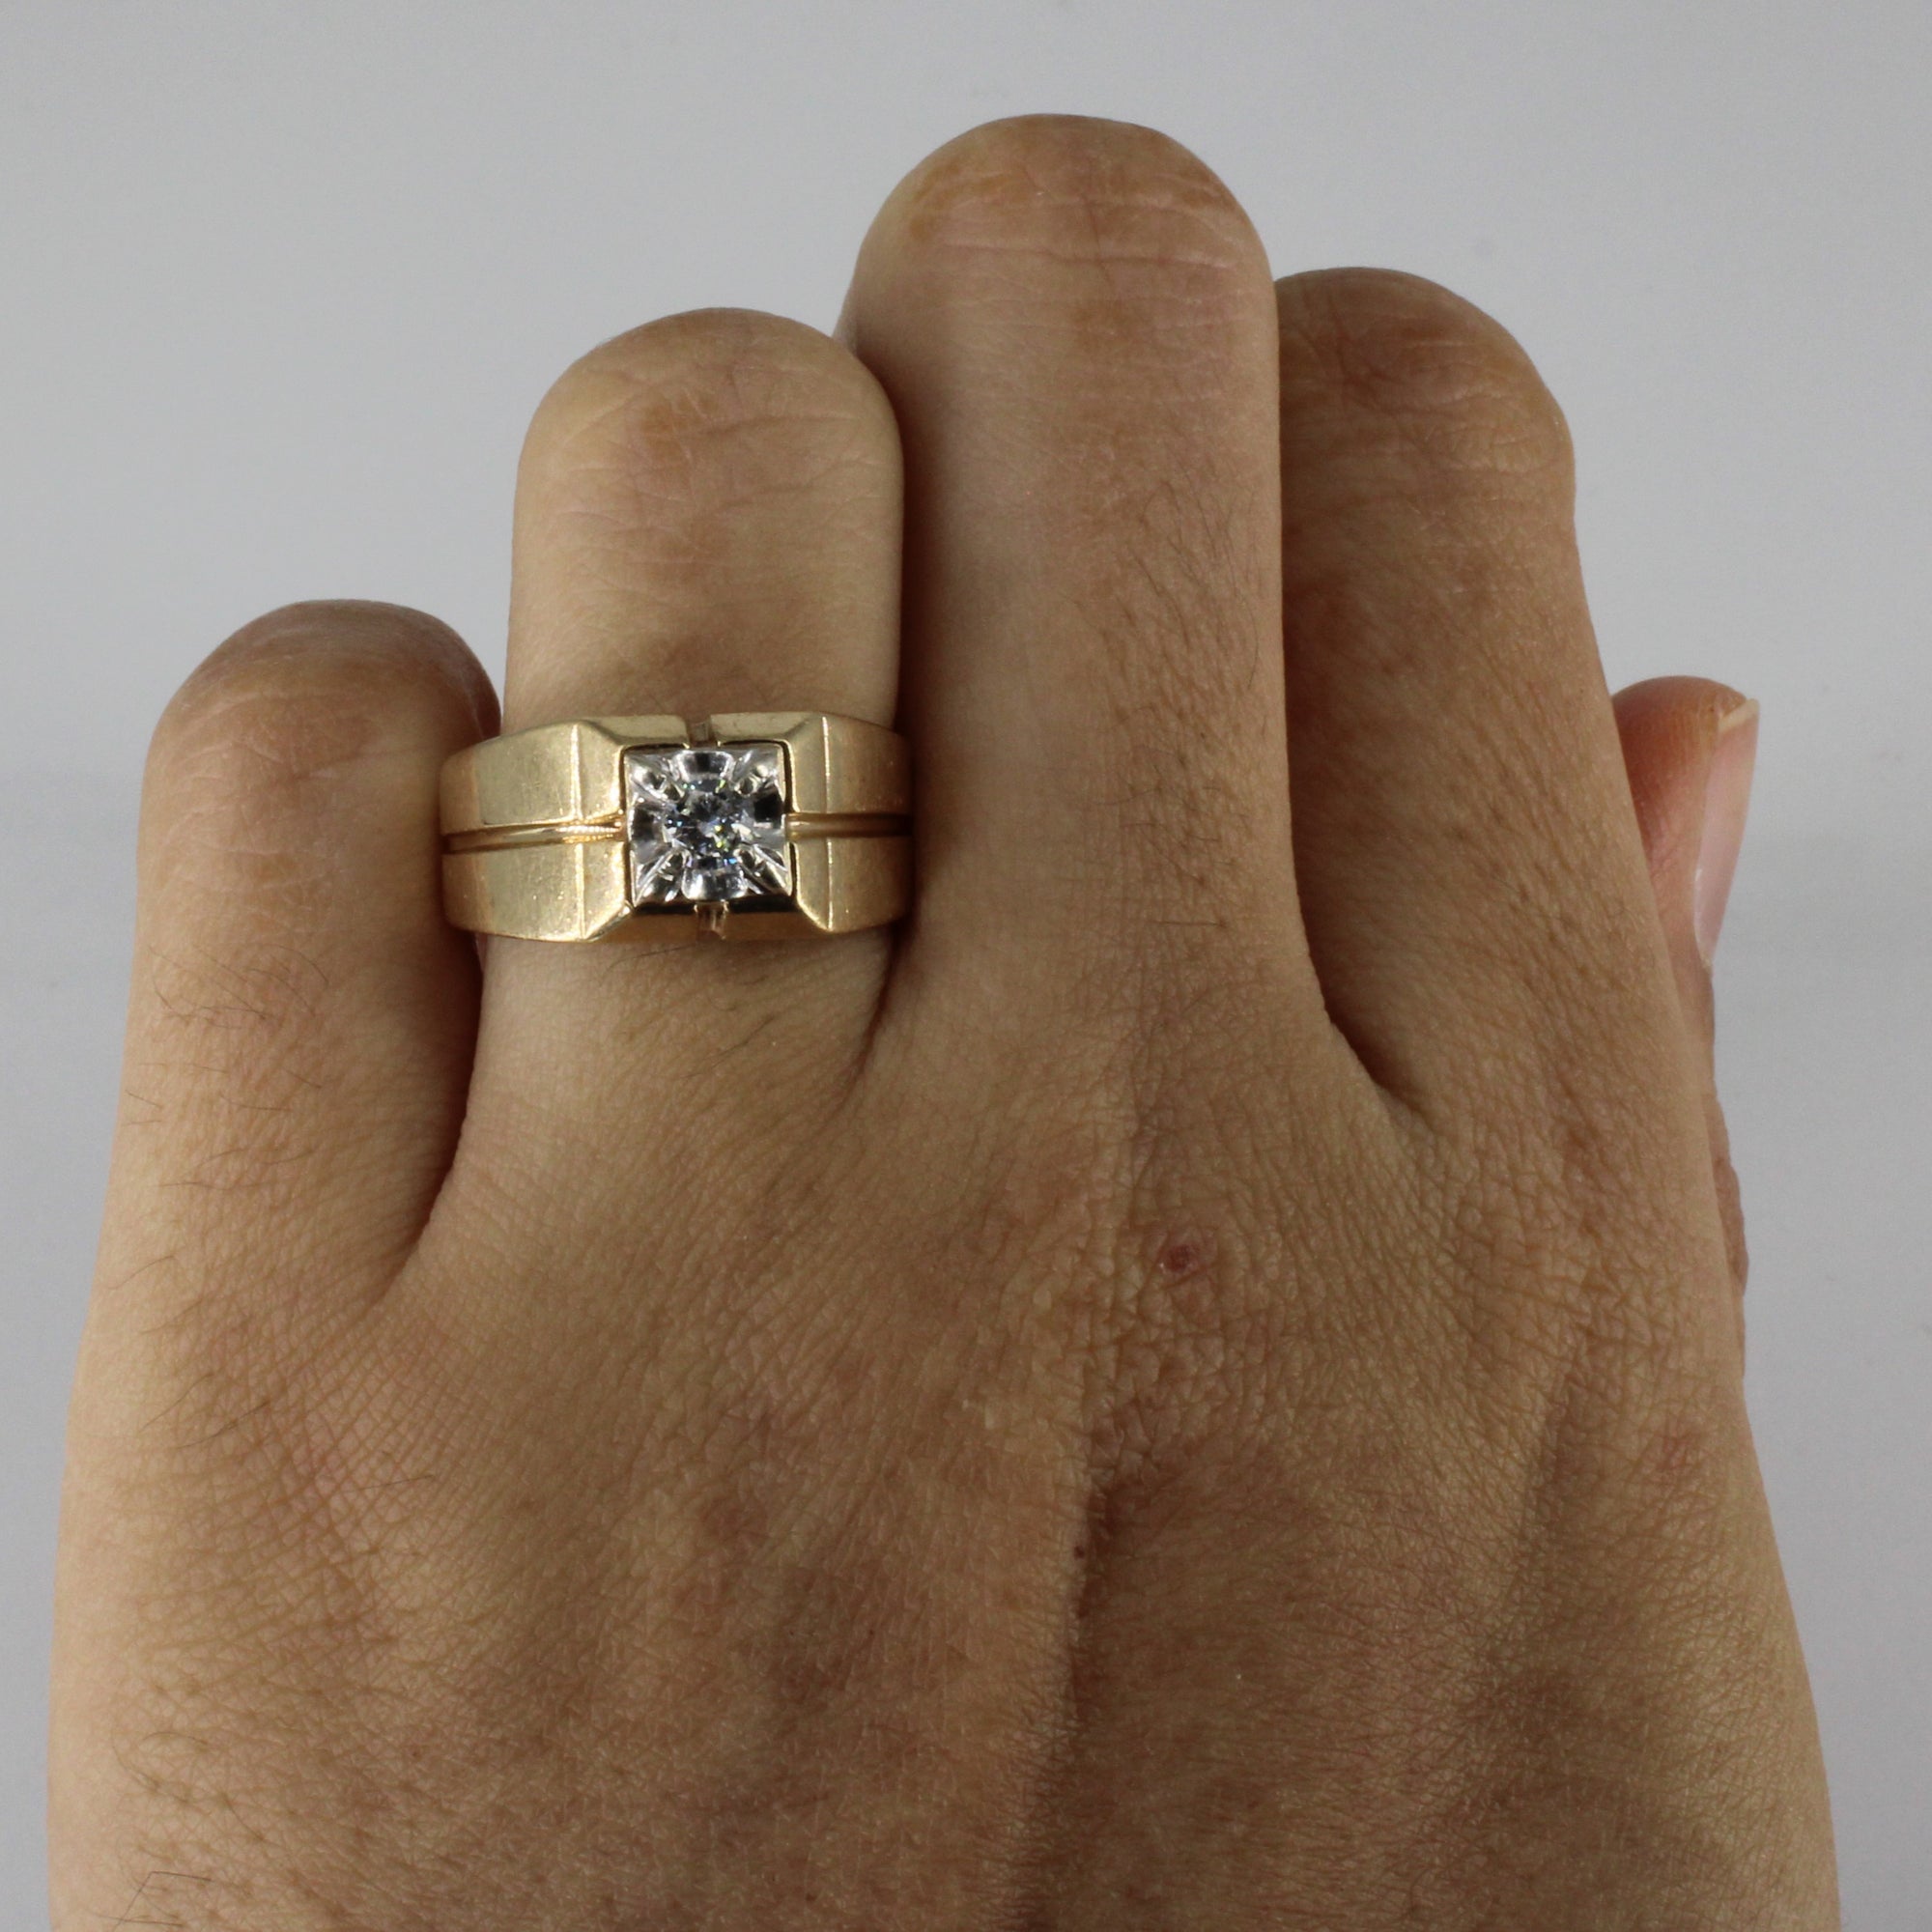 Solitaire Diamond Gold Ring | 0.18ct | SZ 6.75 |